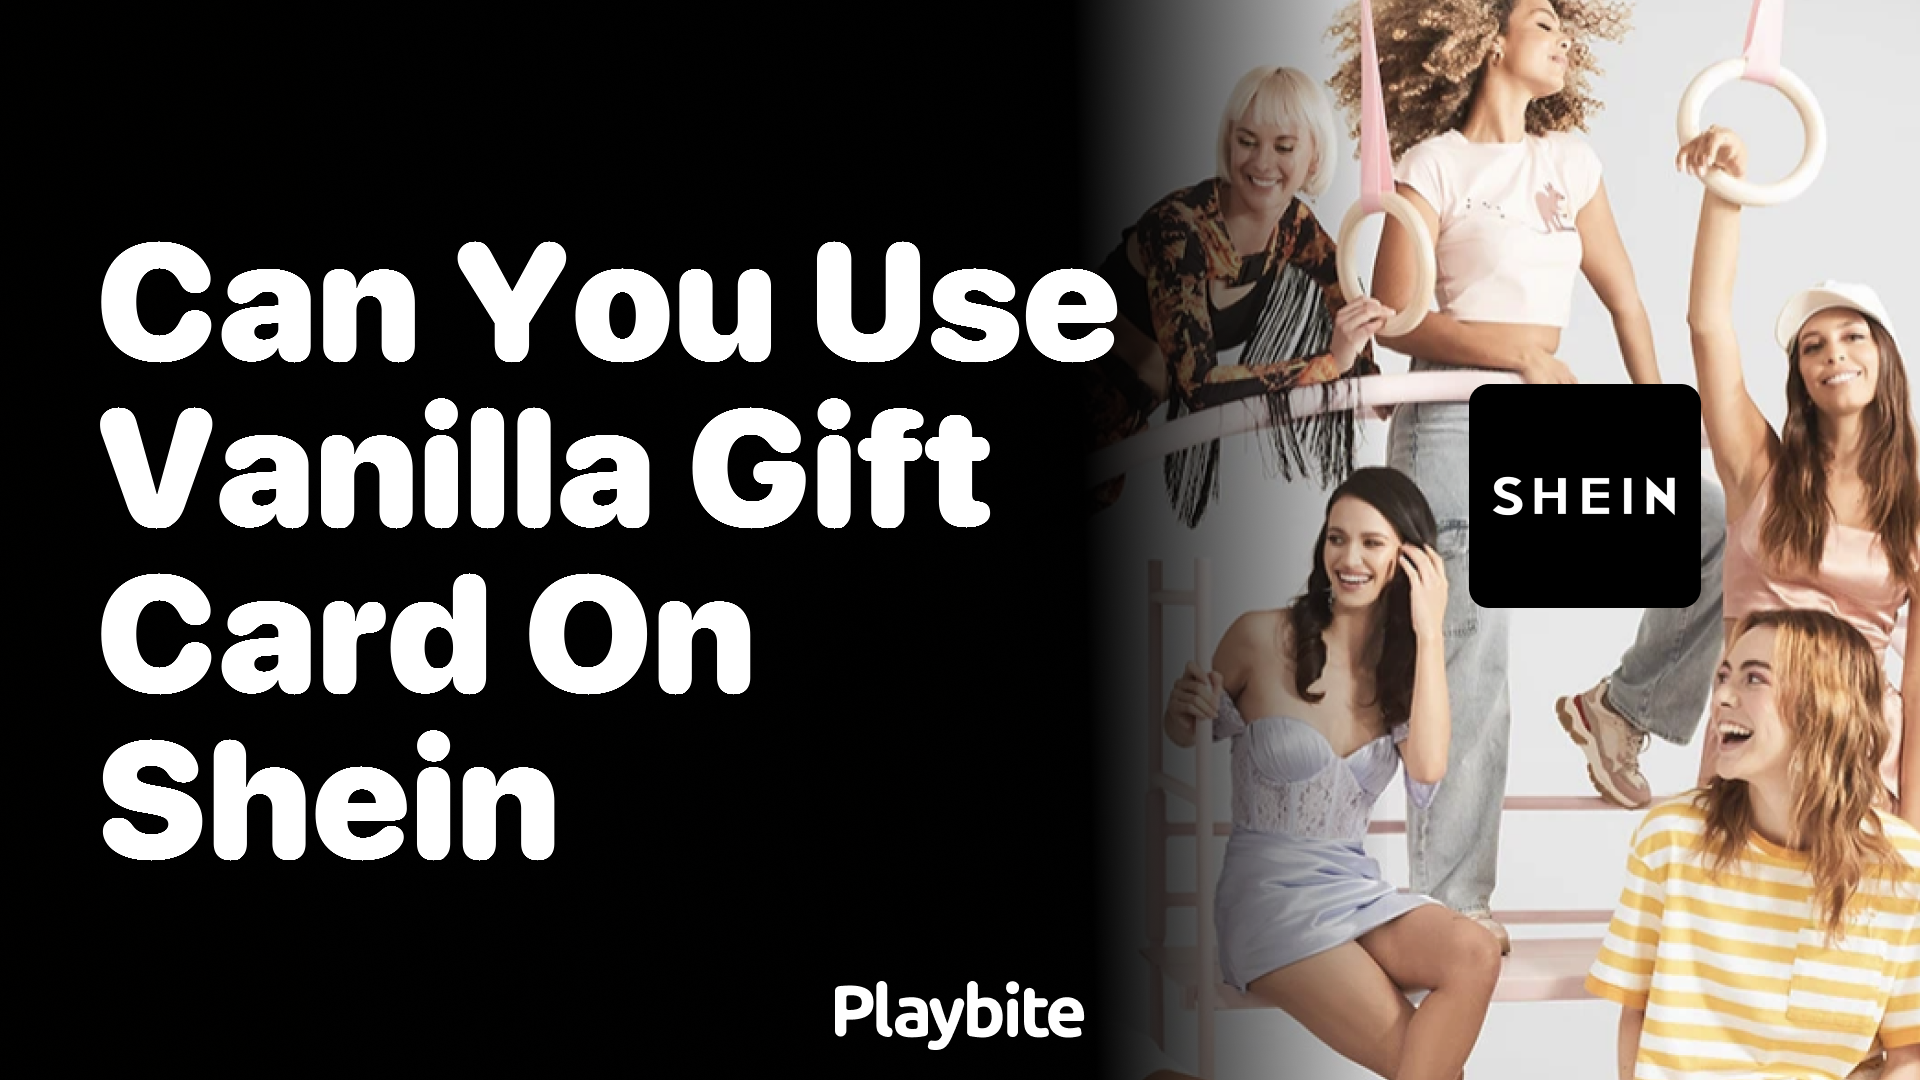 Can You Use a Vanilla Gift Card on SHEIN?